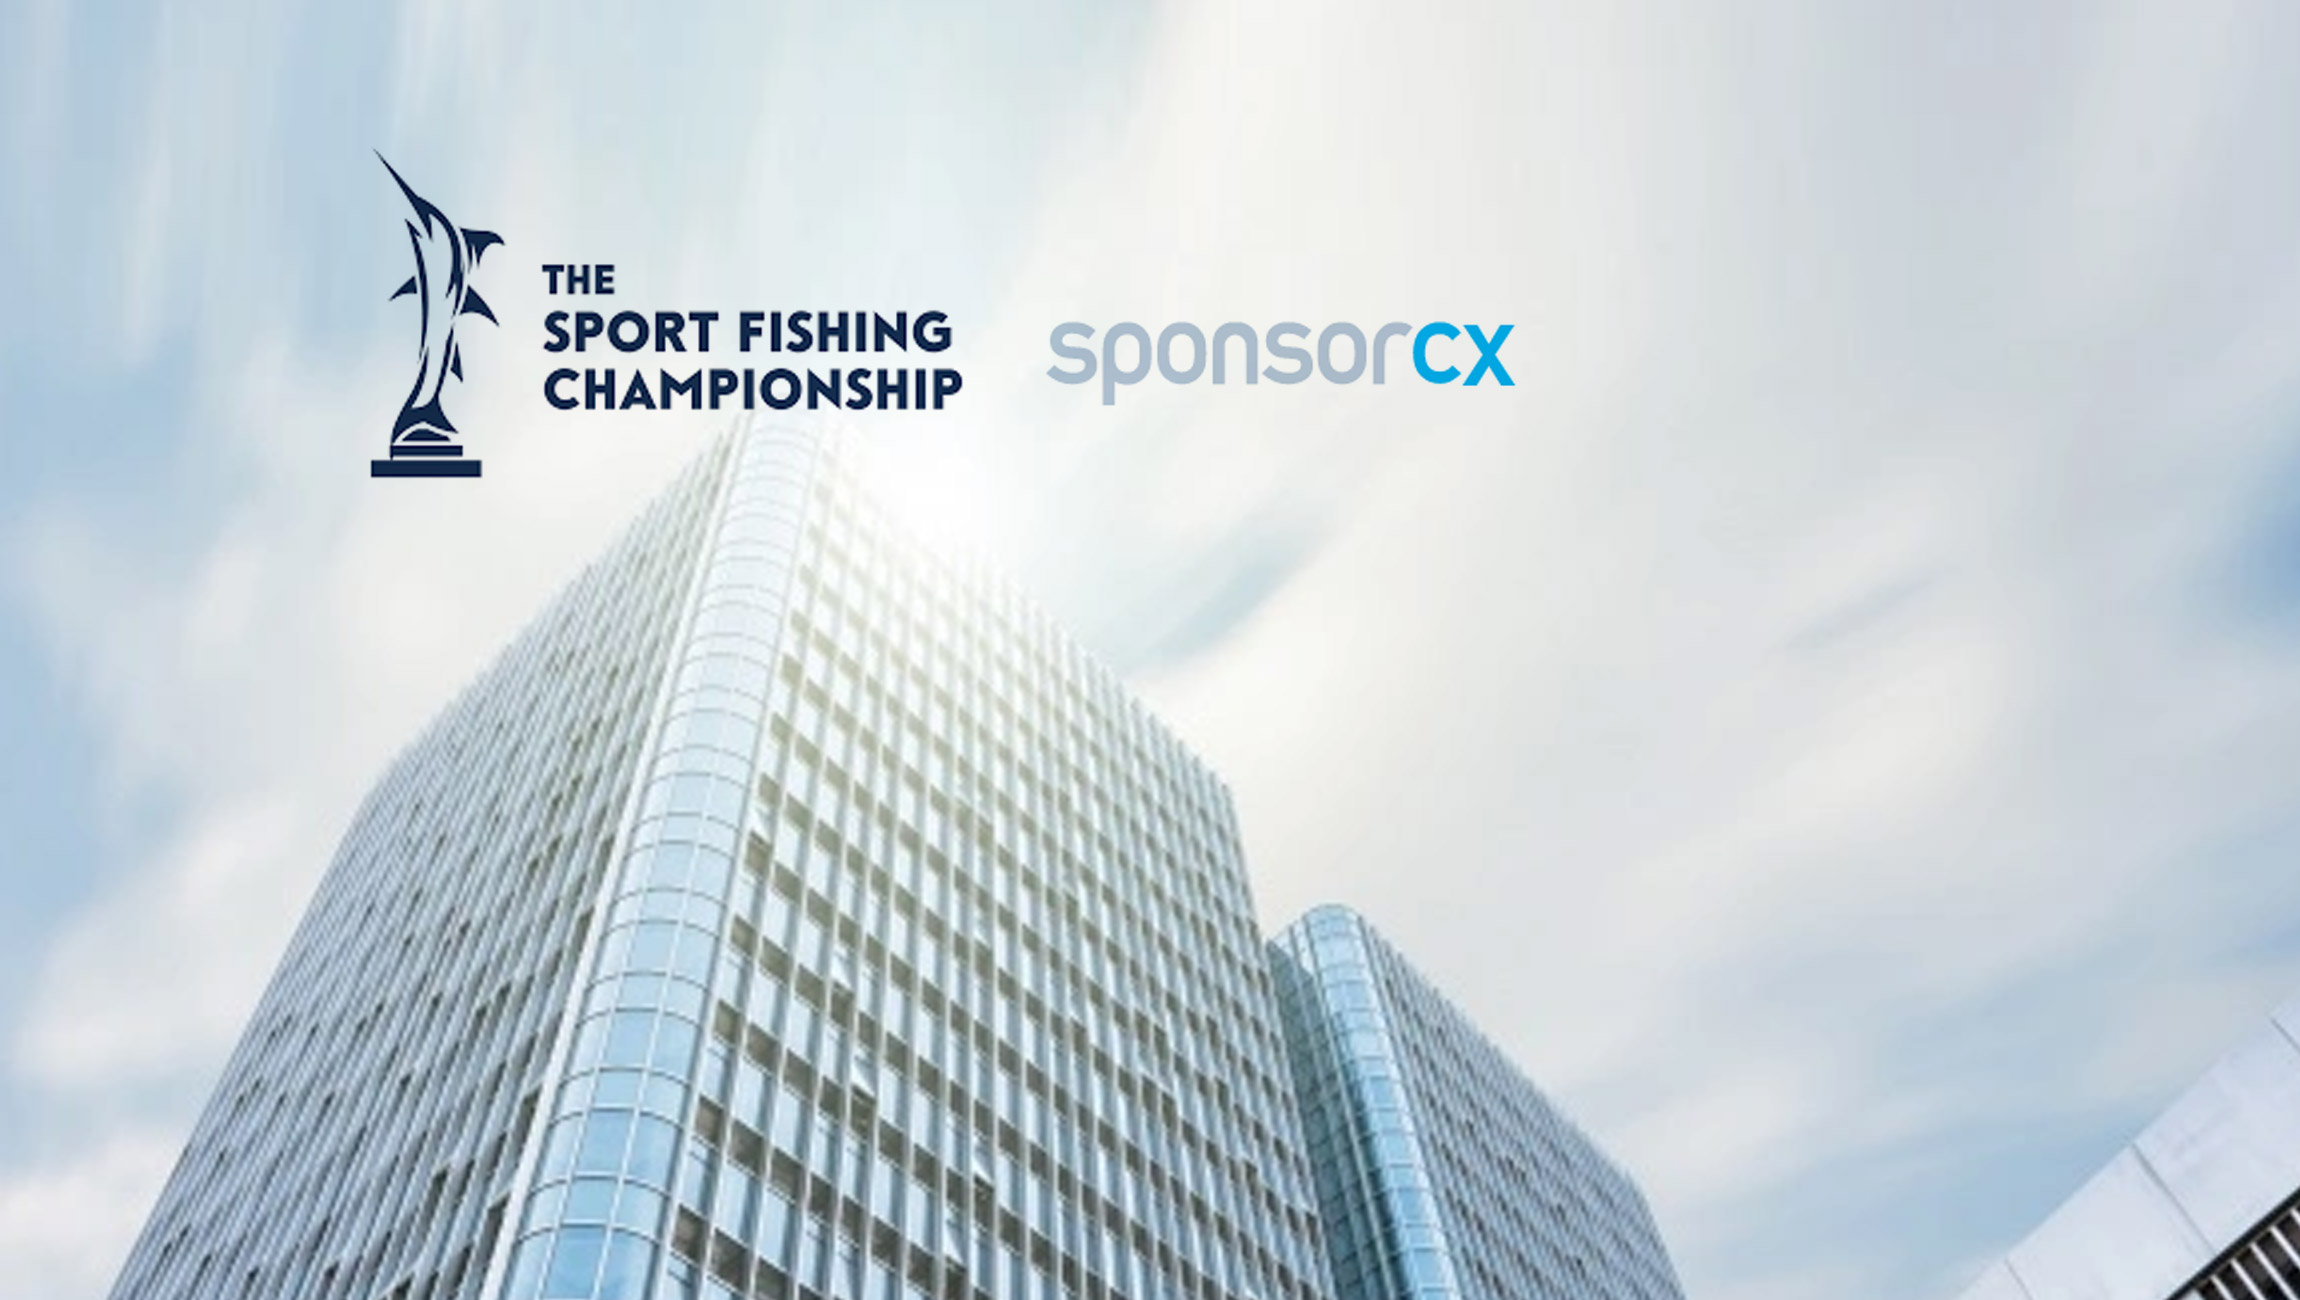 The-Sport-Fishing-Championship-selects-SponsorCX-as-Its-Software-Solution-for-Sponsorship-Management